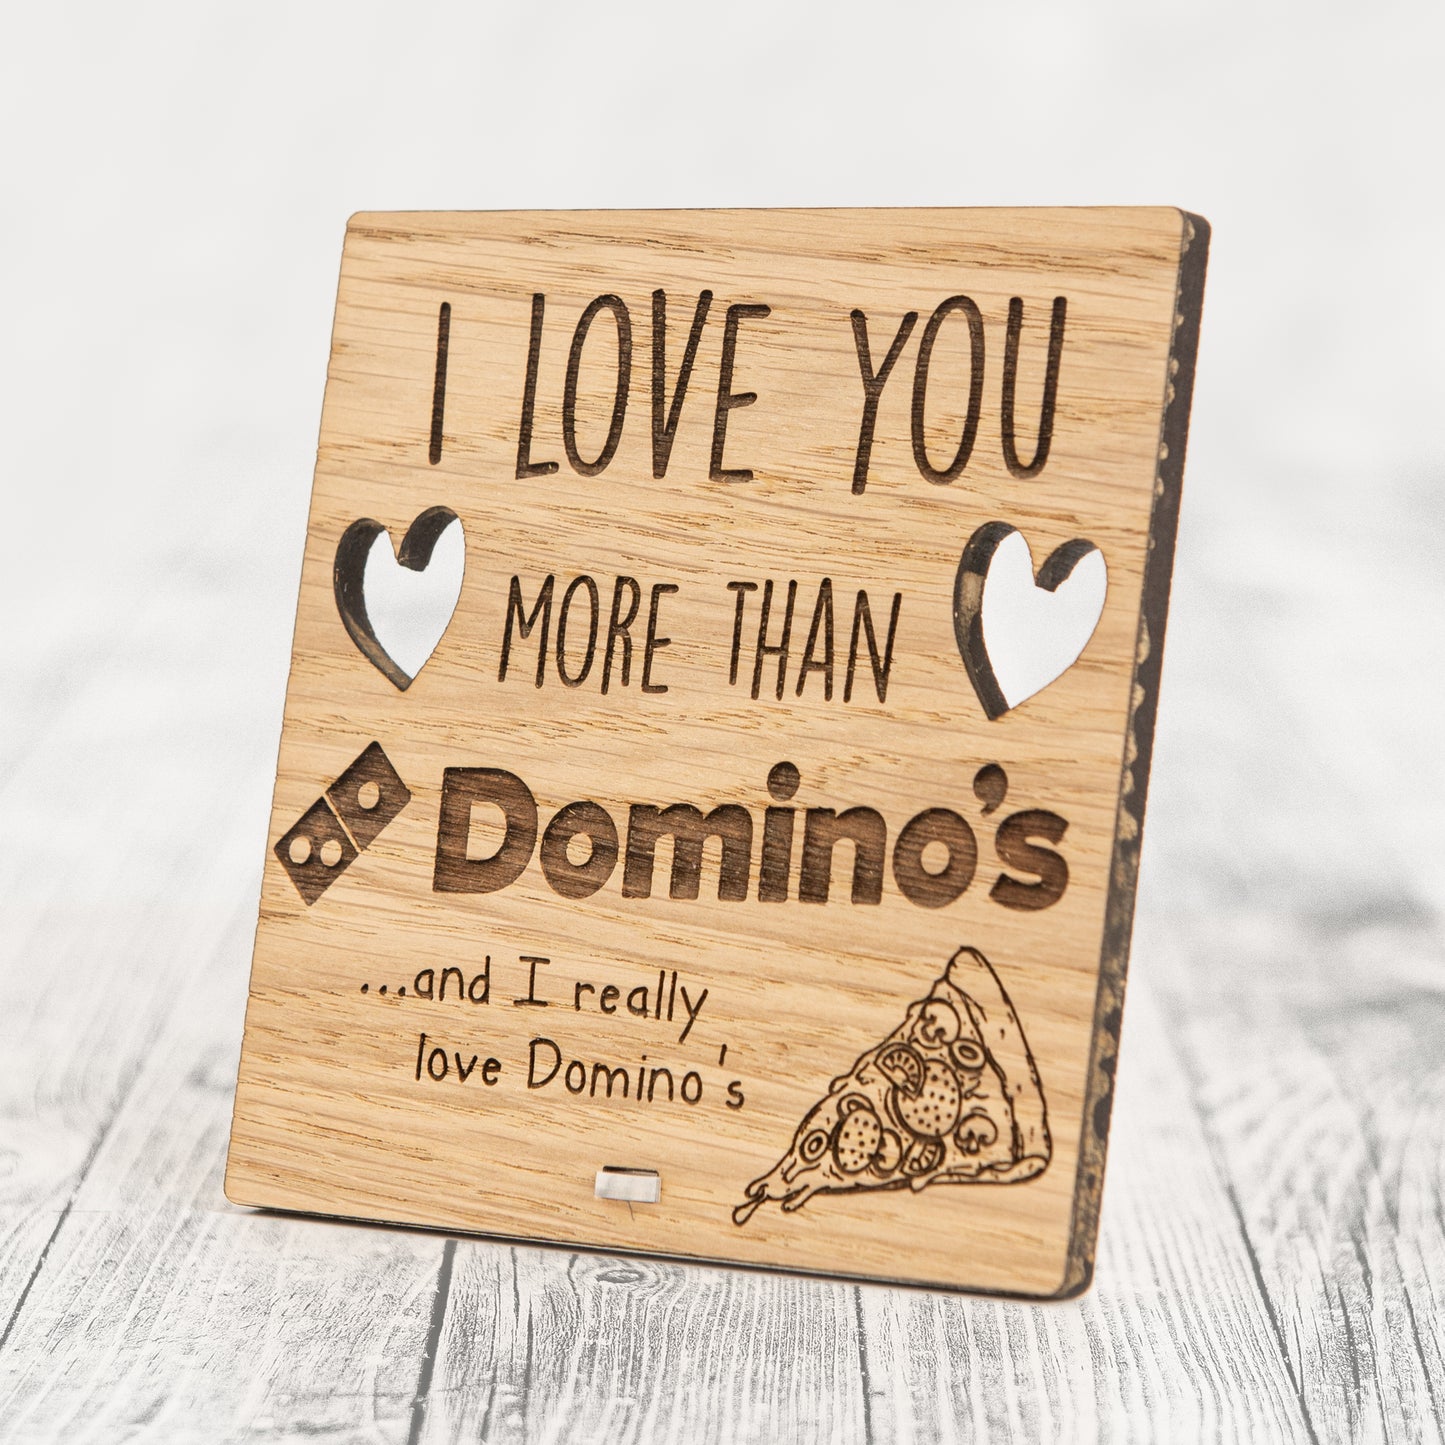 I Love You More Than DOMINOS - Wooden Valentine's Day Plaque